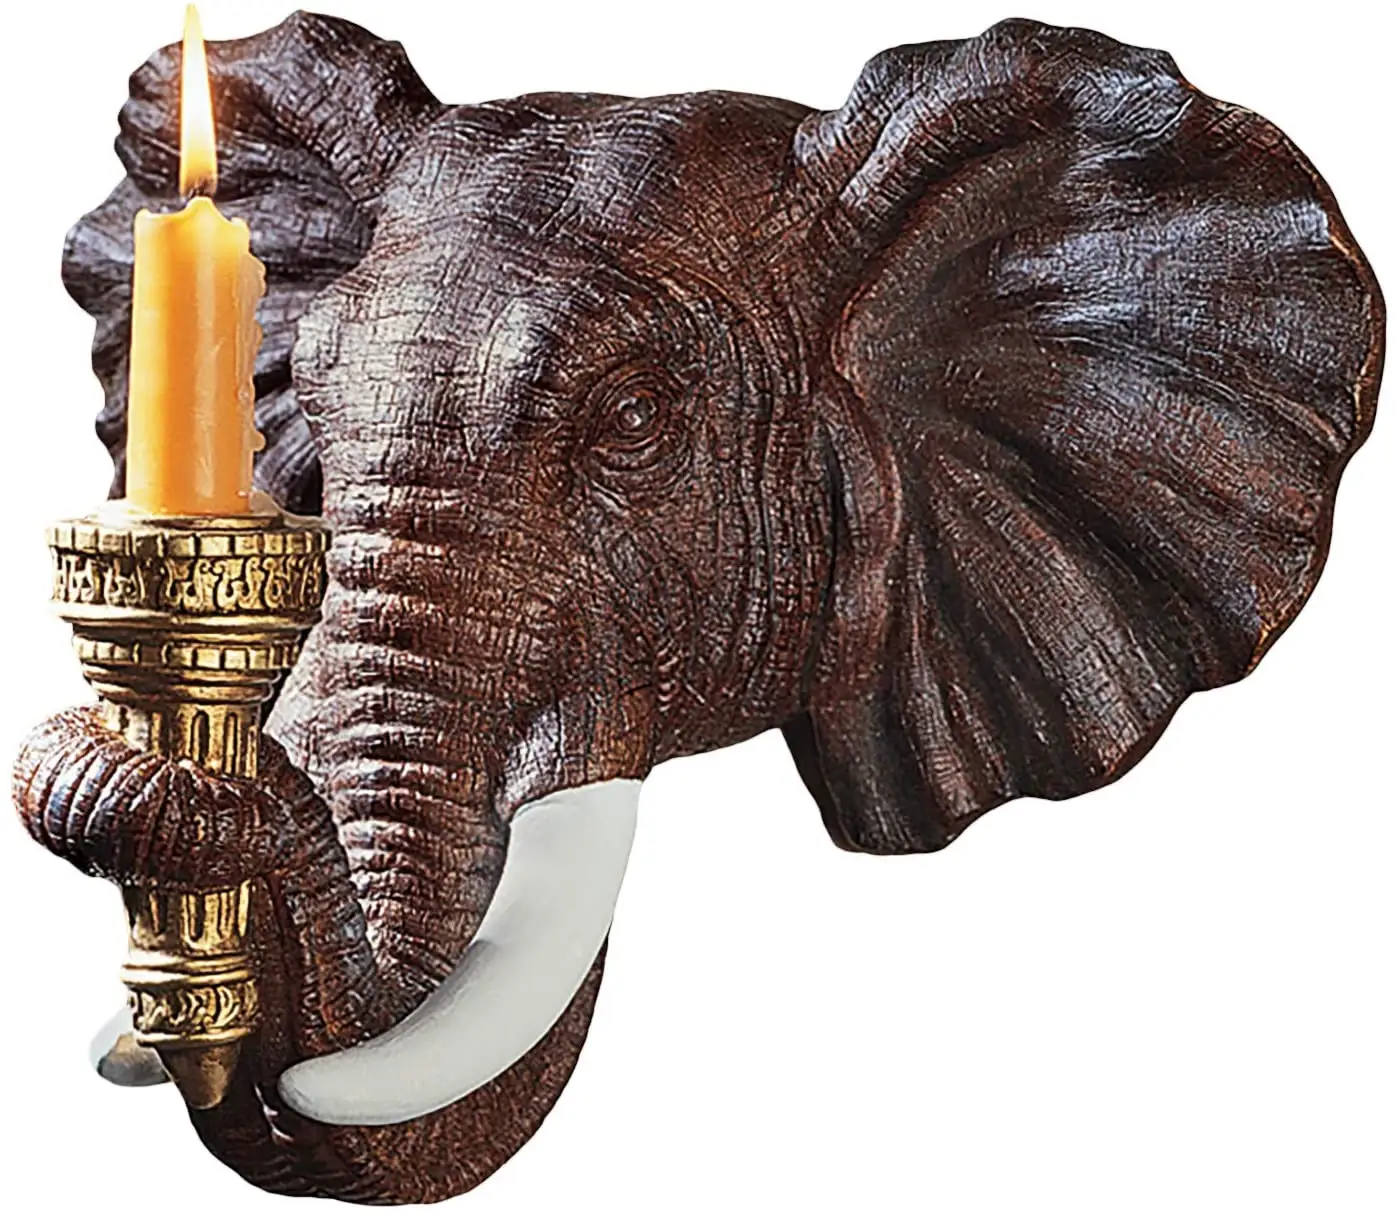 Elephant statue African Decor Candle Holder Wall Sconce Sculpture, 12 Inch, Polyresin, Bronze Finish Home decoration